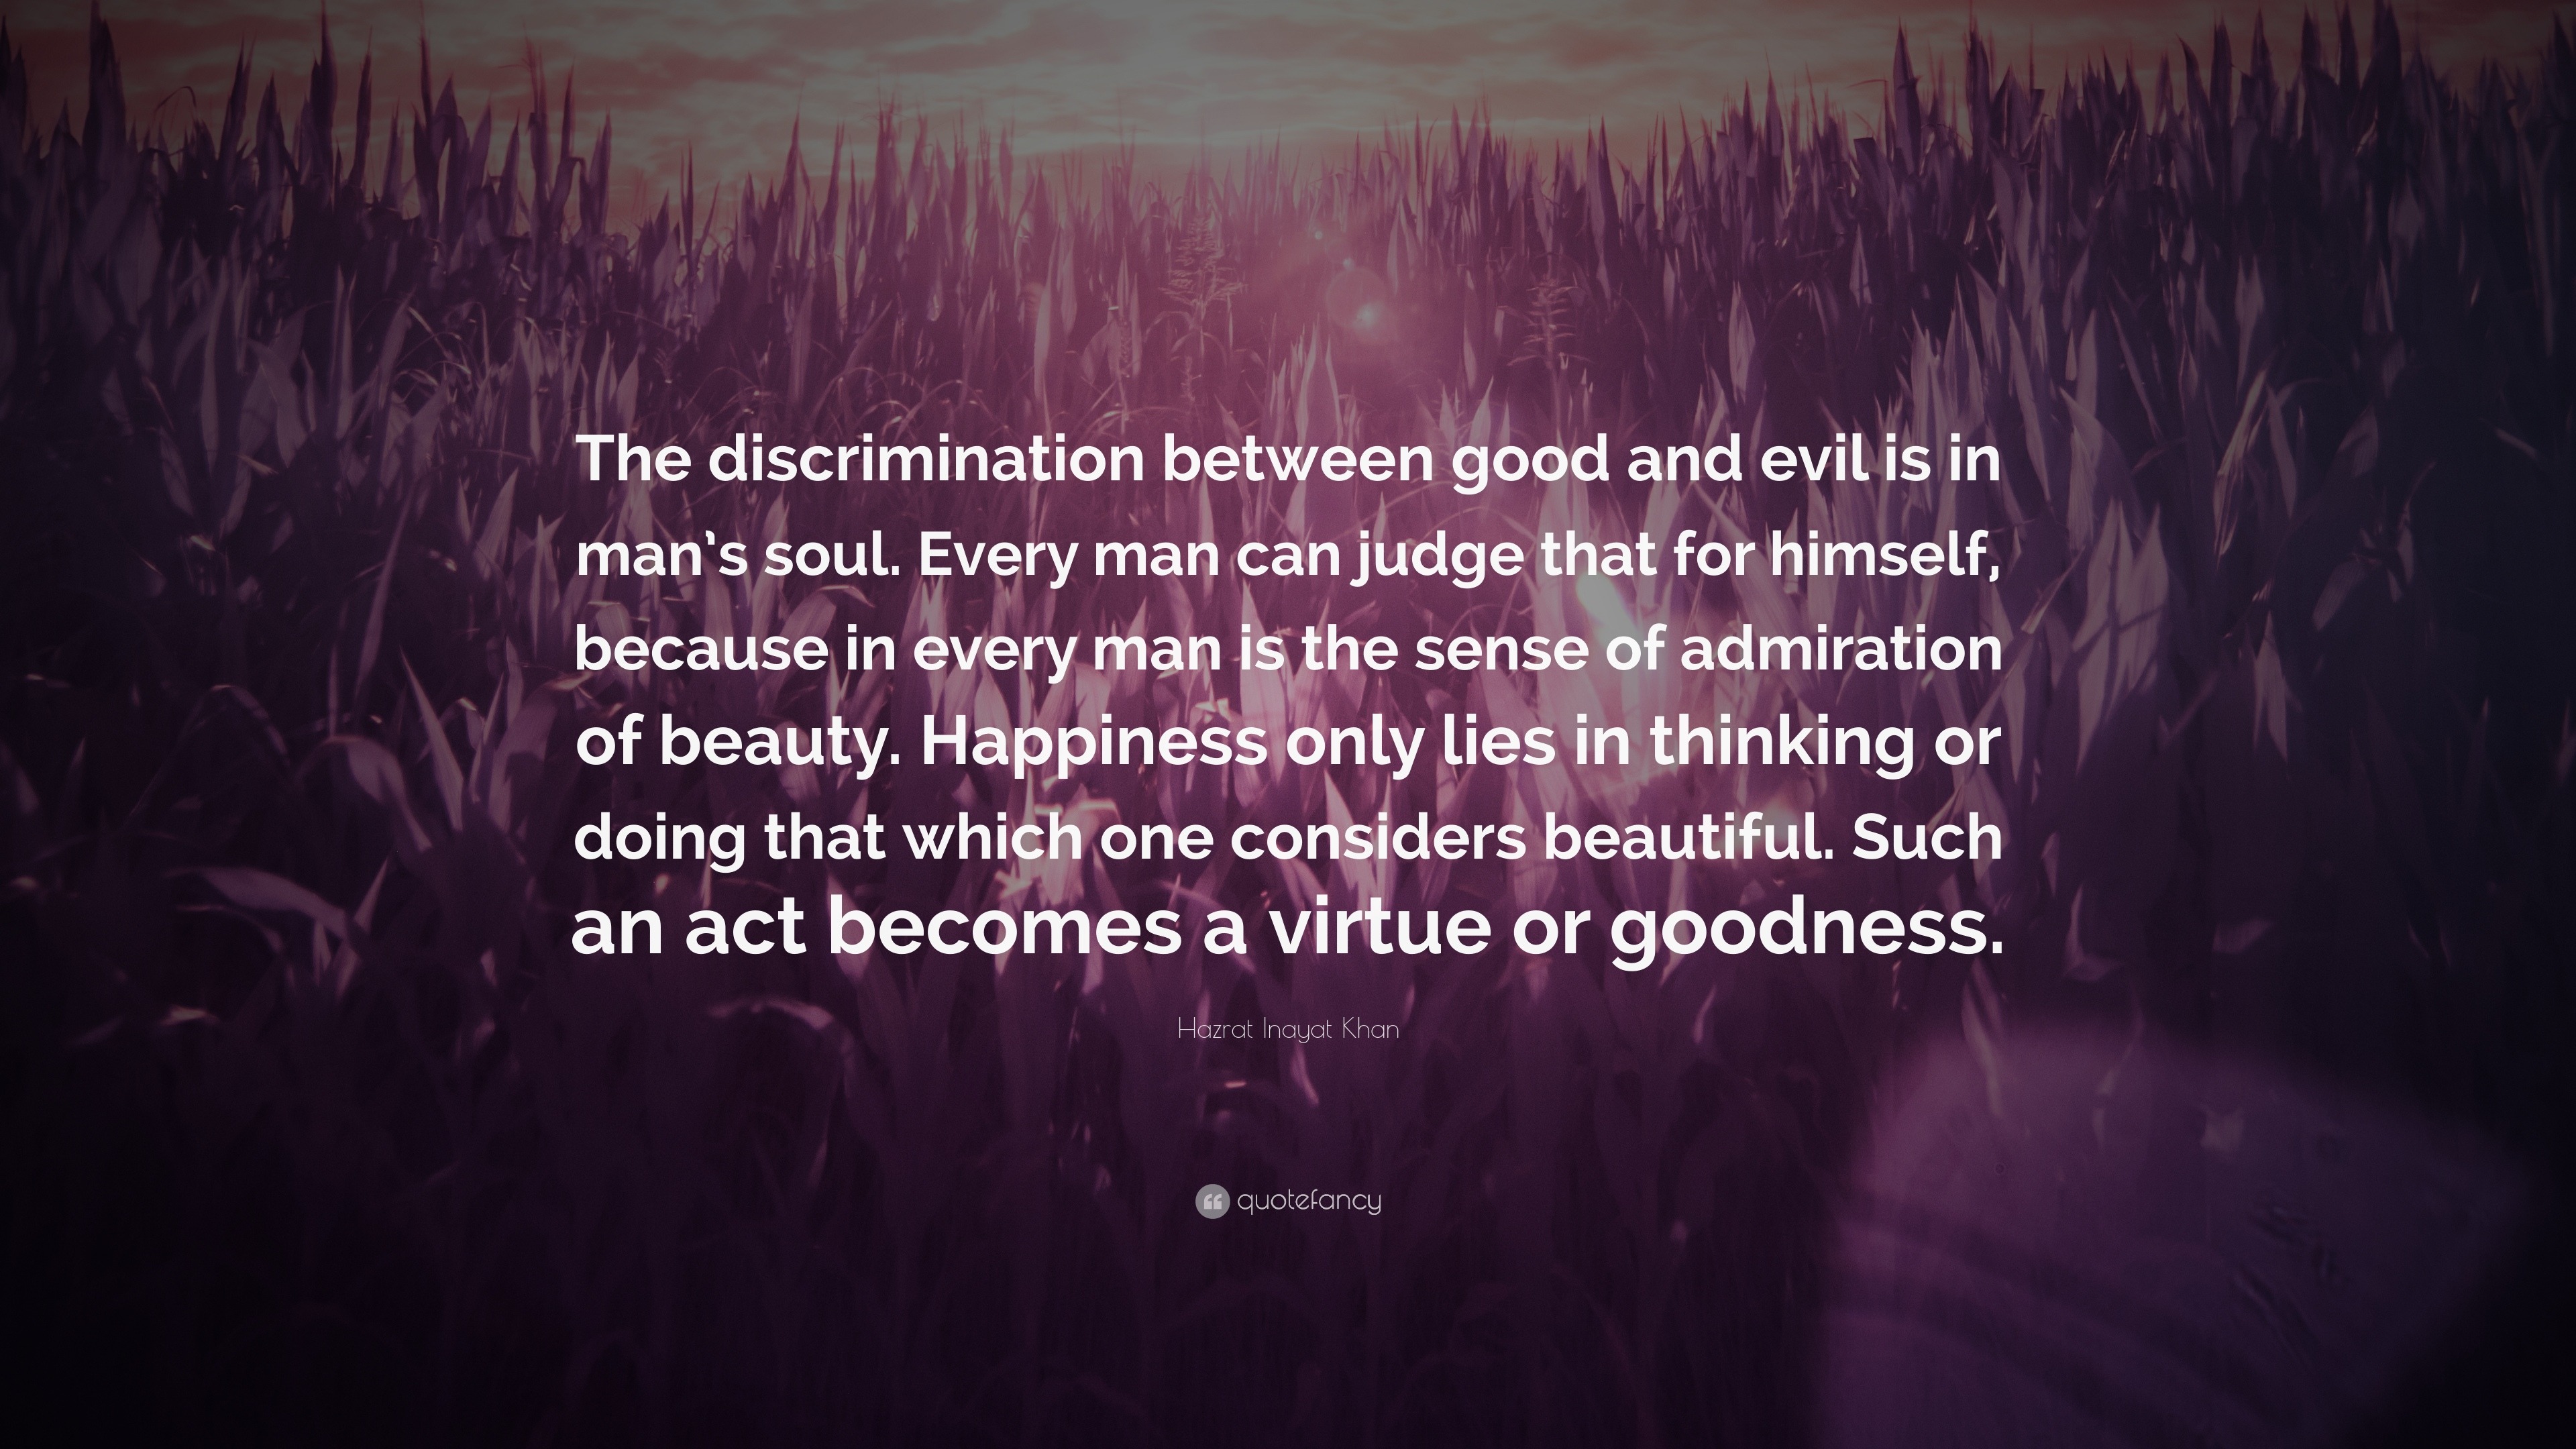 Good And Evil Quotes - WonderfulQuote